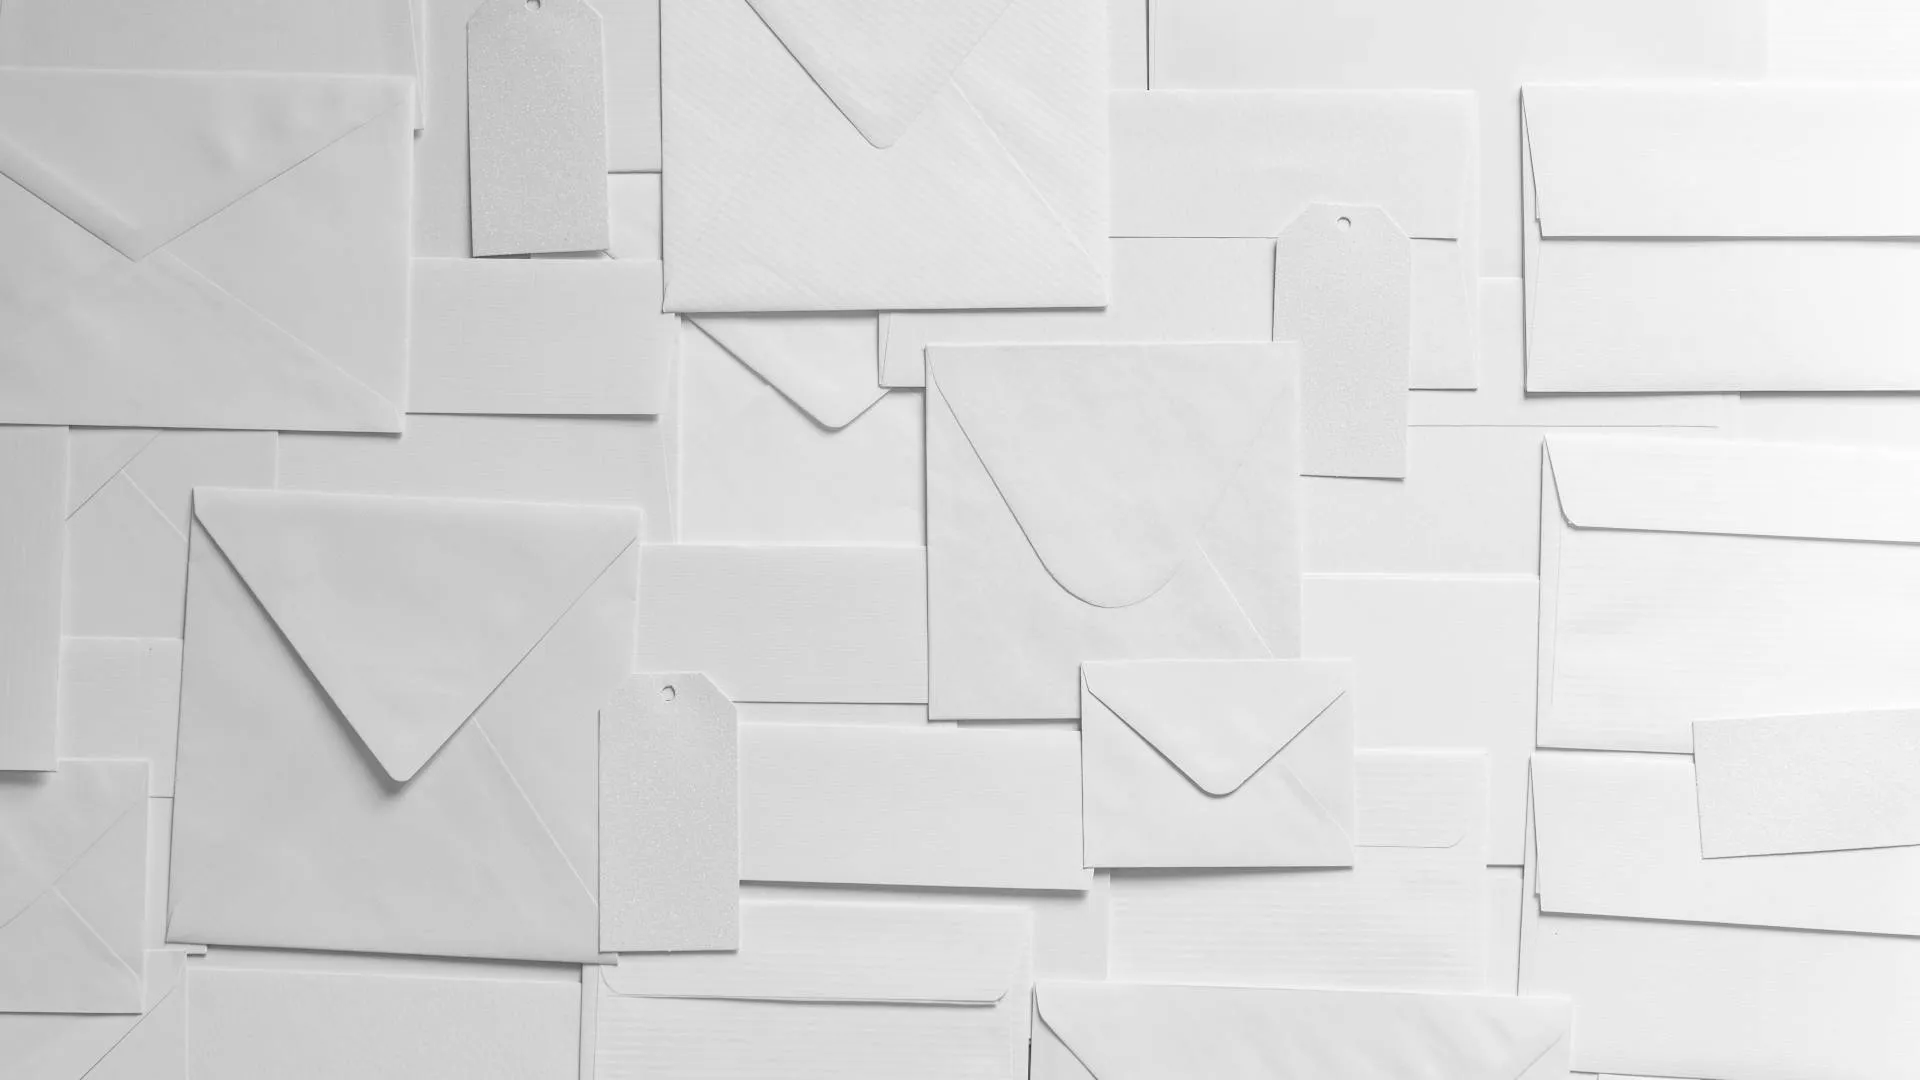 Envelopes laid out on a table